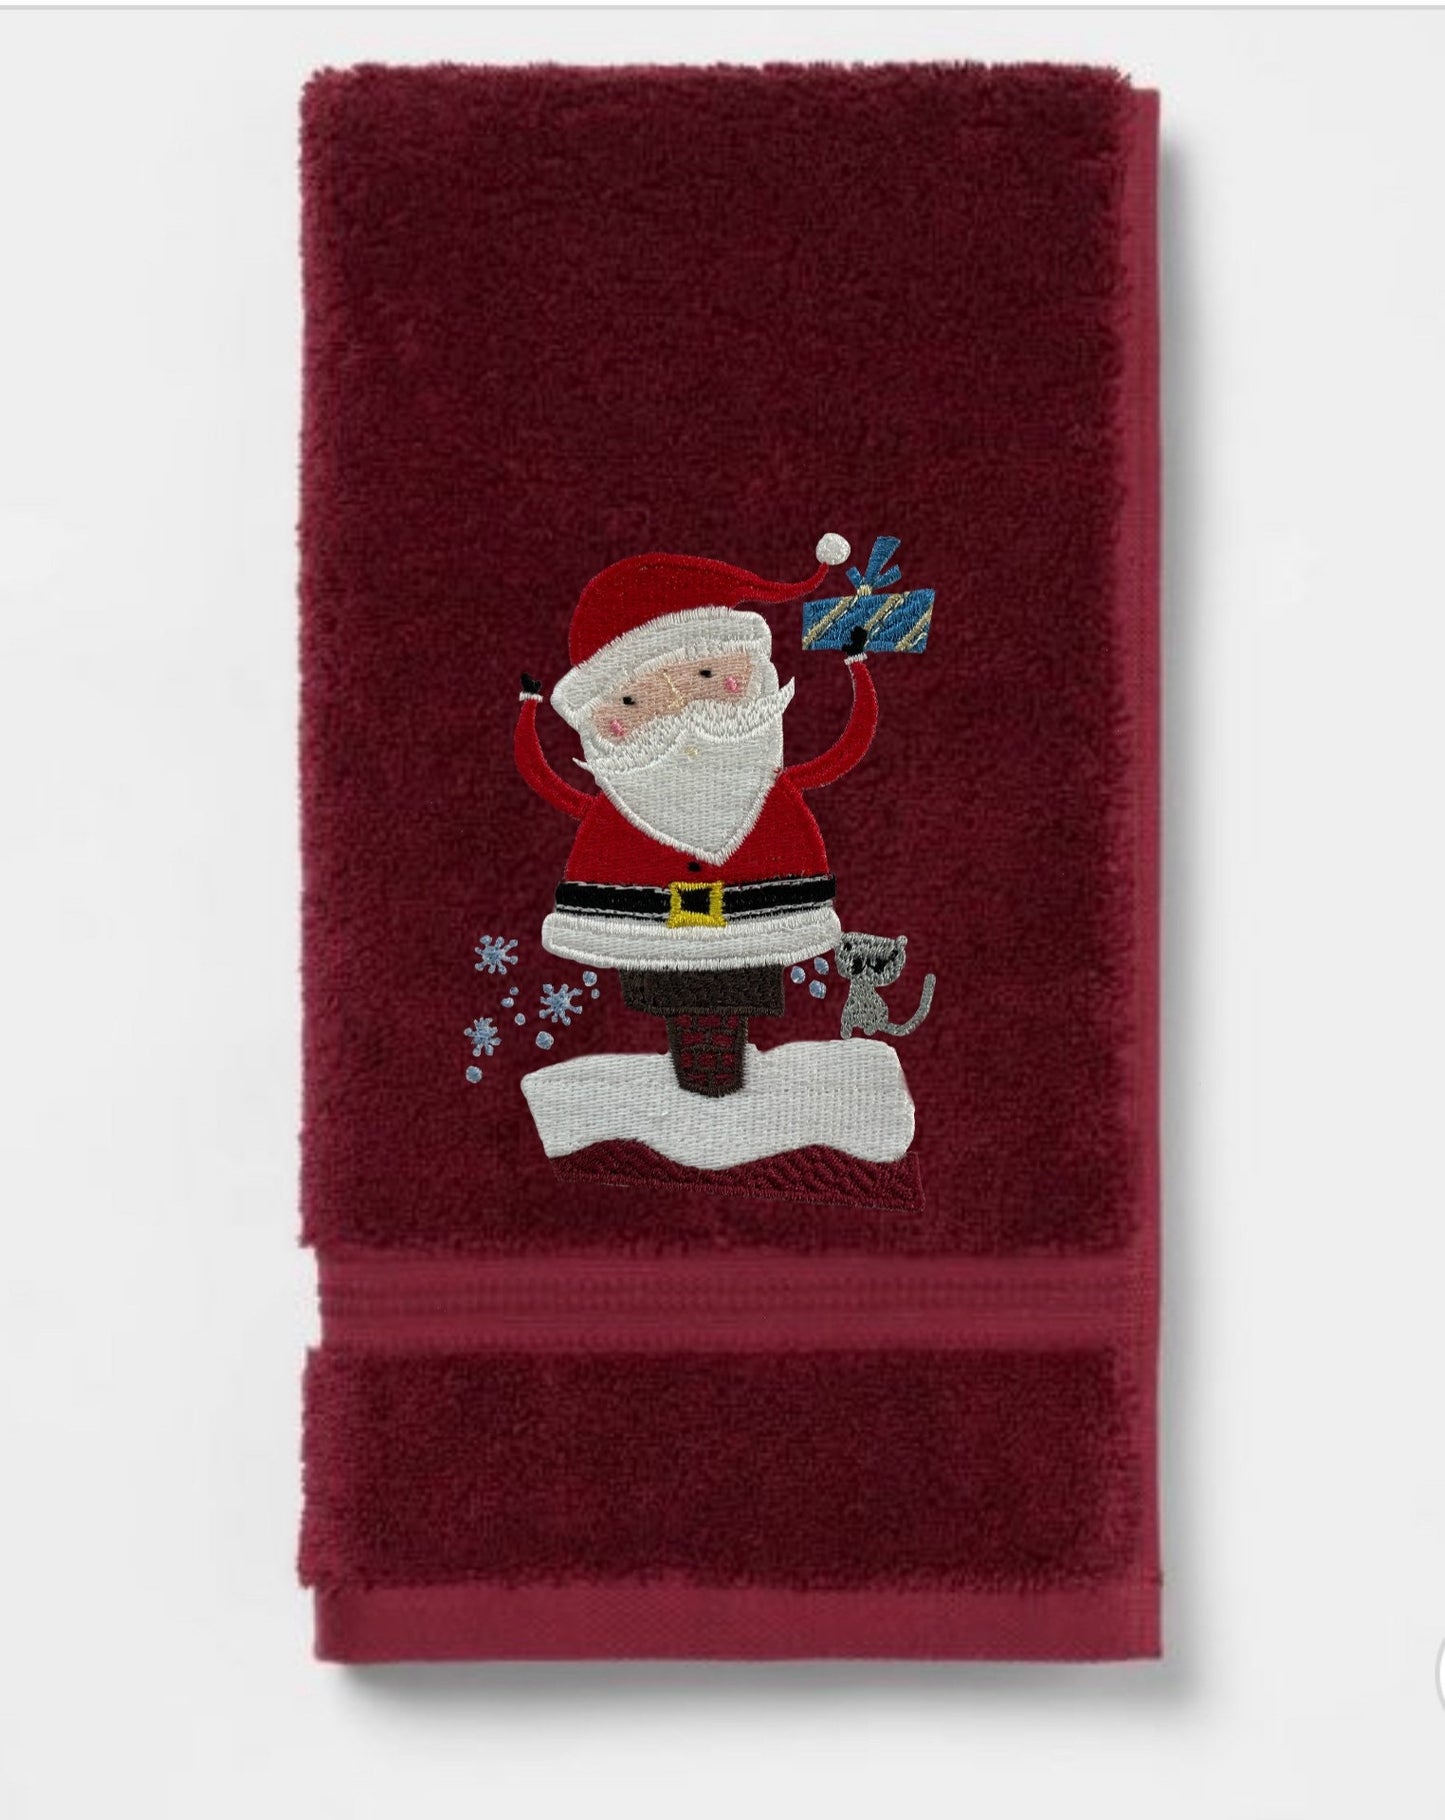 Embroidered Christmas Santa Bath Towels. 100% Cotton Hand or Fingertip Towel